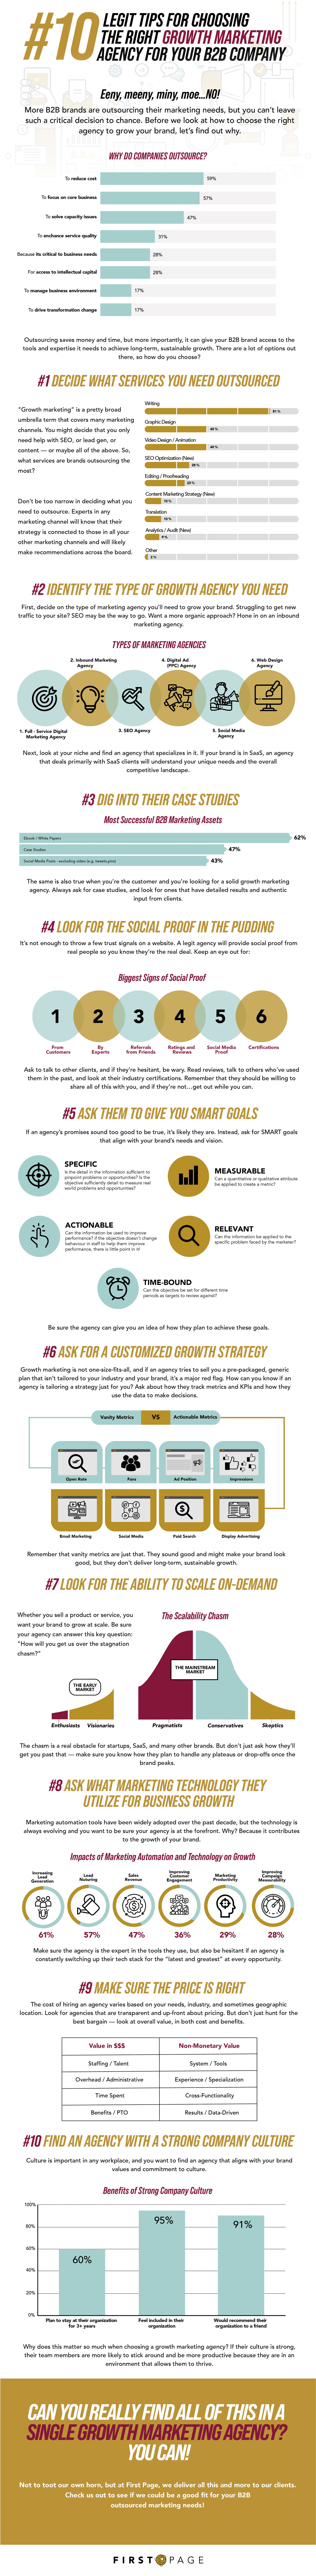 10 (LEGIT) Tips for Choosing the Right Growth Marketing Agency for Your B2B Company [INFOGRAPHIC]